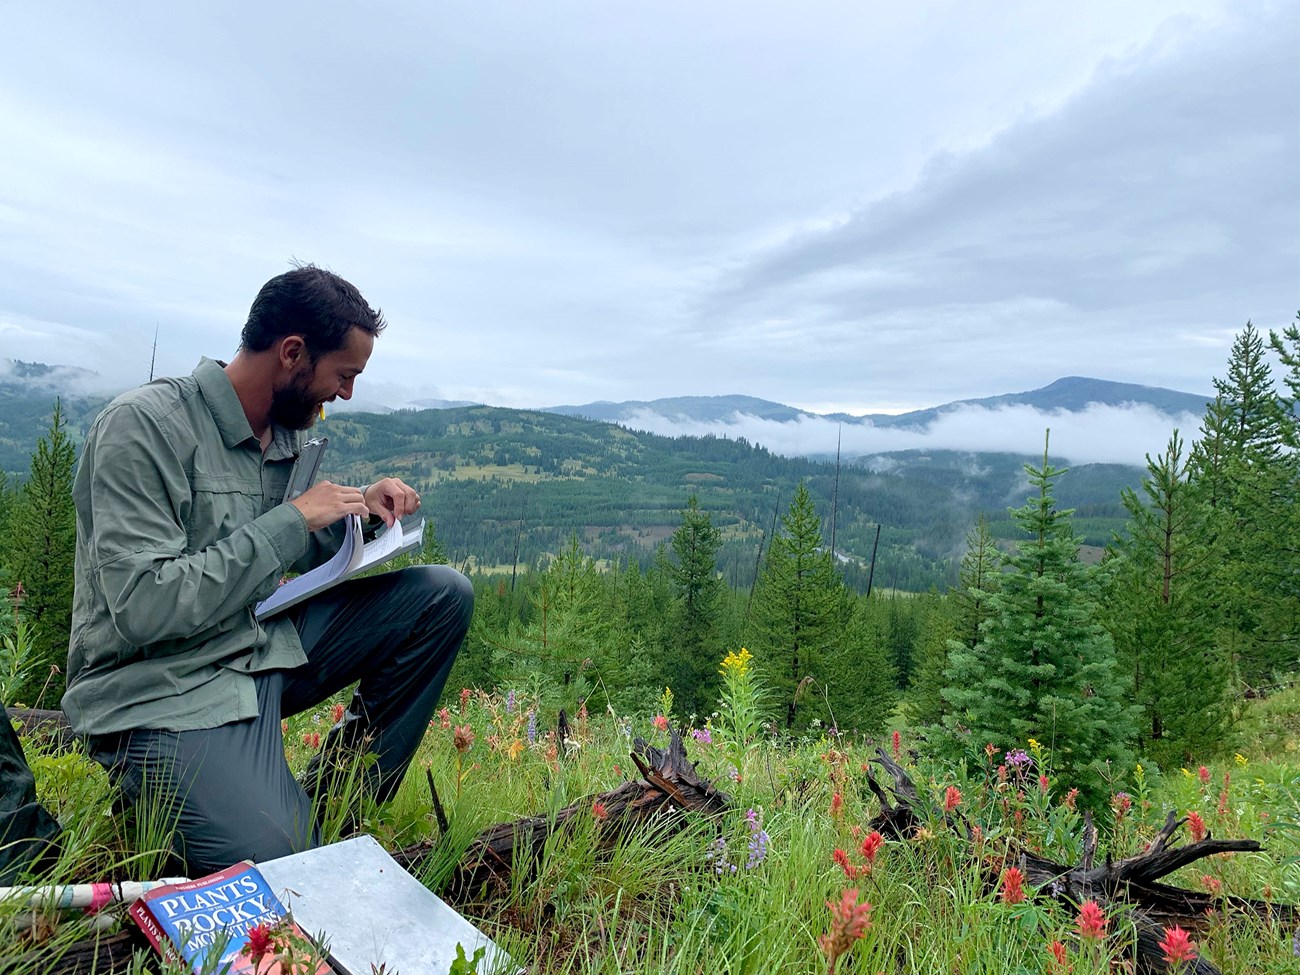 A man looks at a notebook as he crouches in a field of colorful wildflowers in front of a forest. Mountains are in the distance.